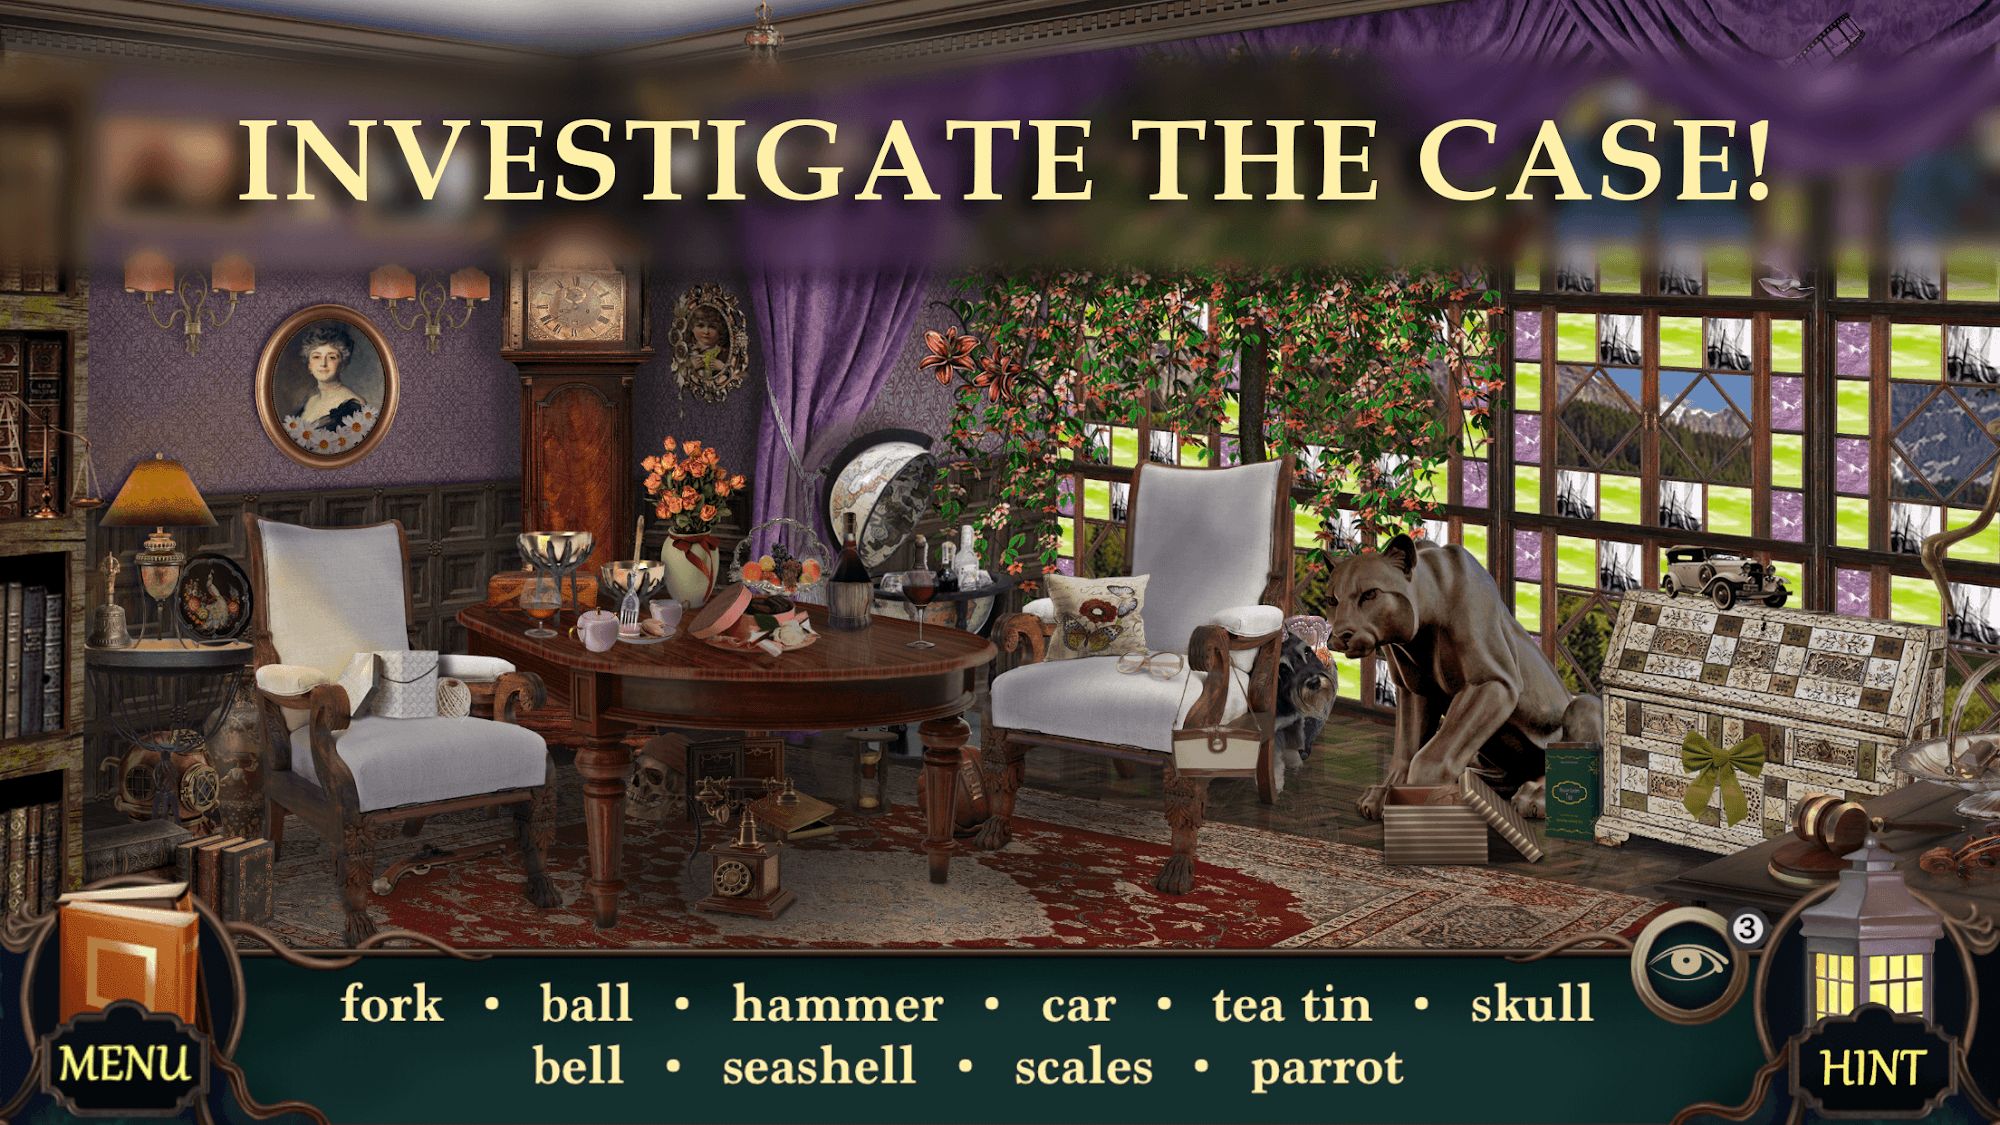 Download Mystery Hotel - Seek and Find Hidden Objects Games für Android kostenlos.